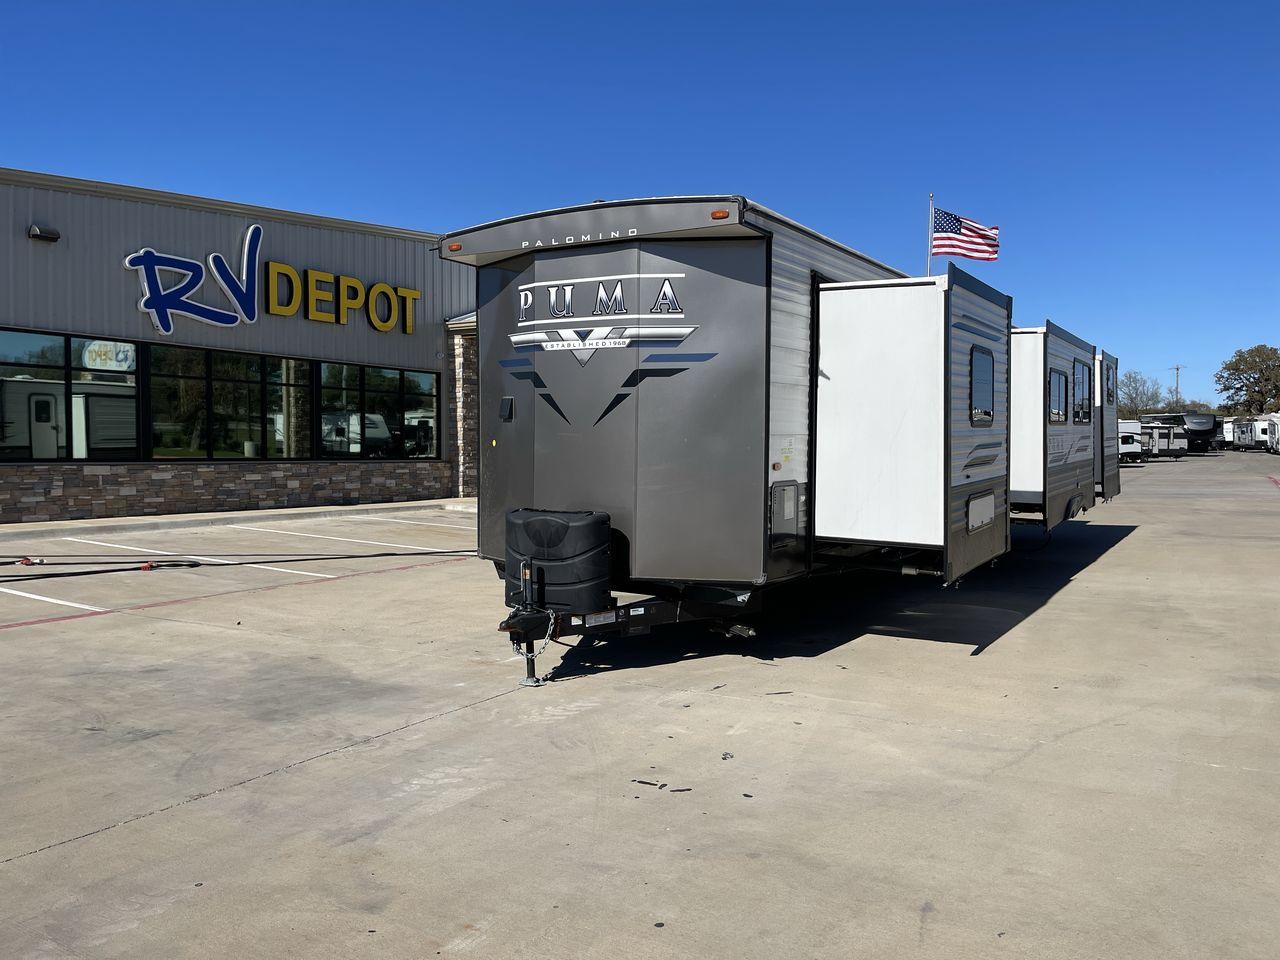 2022 TAN FOREST RIVER PUMA 39PQB (4X4TPUR27NP) , Length: 42.25 ft | Dry Weight: 10,709 lbs | GVWR: 13,413 lbs | Slides: 4 transmission, located at 4319 N Main St, Cleburne, TX, 76033, (817) 678-5133, 32.385960, -97.391212 - Are you in the market for a spacious and luxurious travel trailer in Cleburne, TX? Look no further than RV Depot, where we have an incredible 2022 FOREST RIVER PUMA 39PQB available for sale. With its affordable price of $50,995, this travel trailer is the perfect choice for families or groups lookin - Photo #0